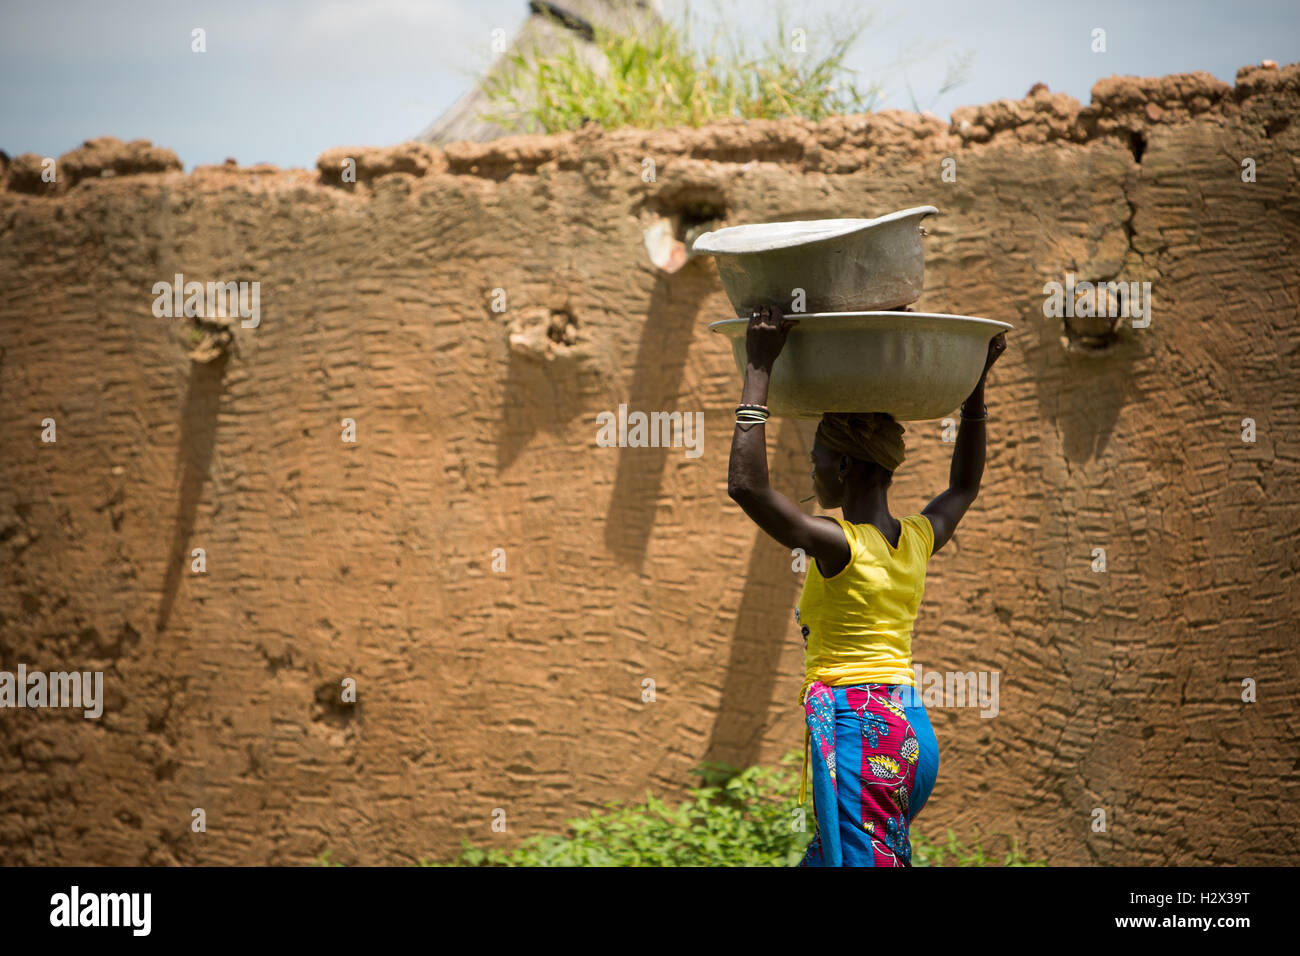 A woman carries basins on her head in rural Réo department, Burkina Faso, West Africa. Stock Photo